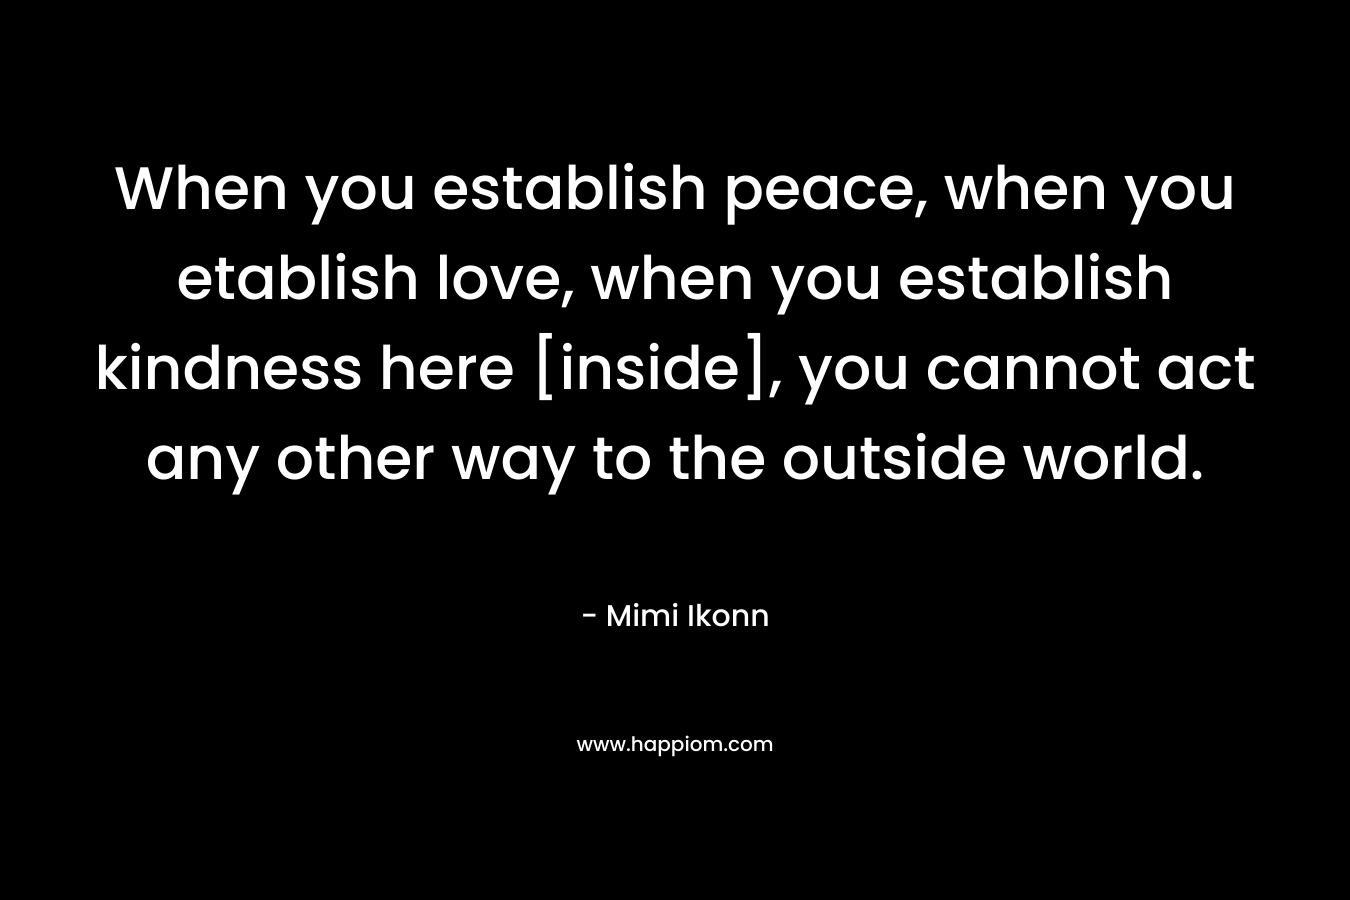 When you establish peace, when you etablish love, when you establish kindness here [inside], you cannot act any other way to the outside world.